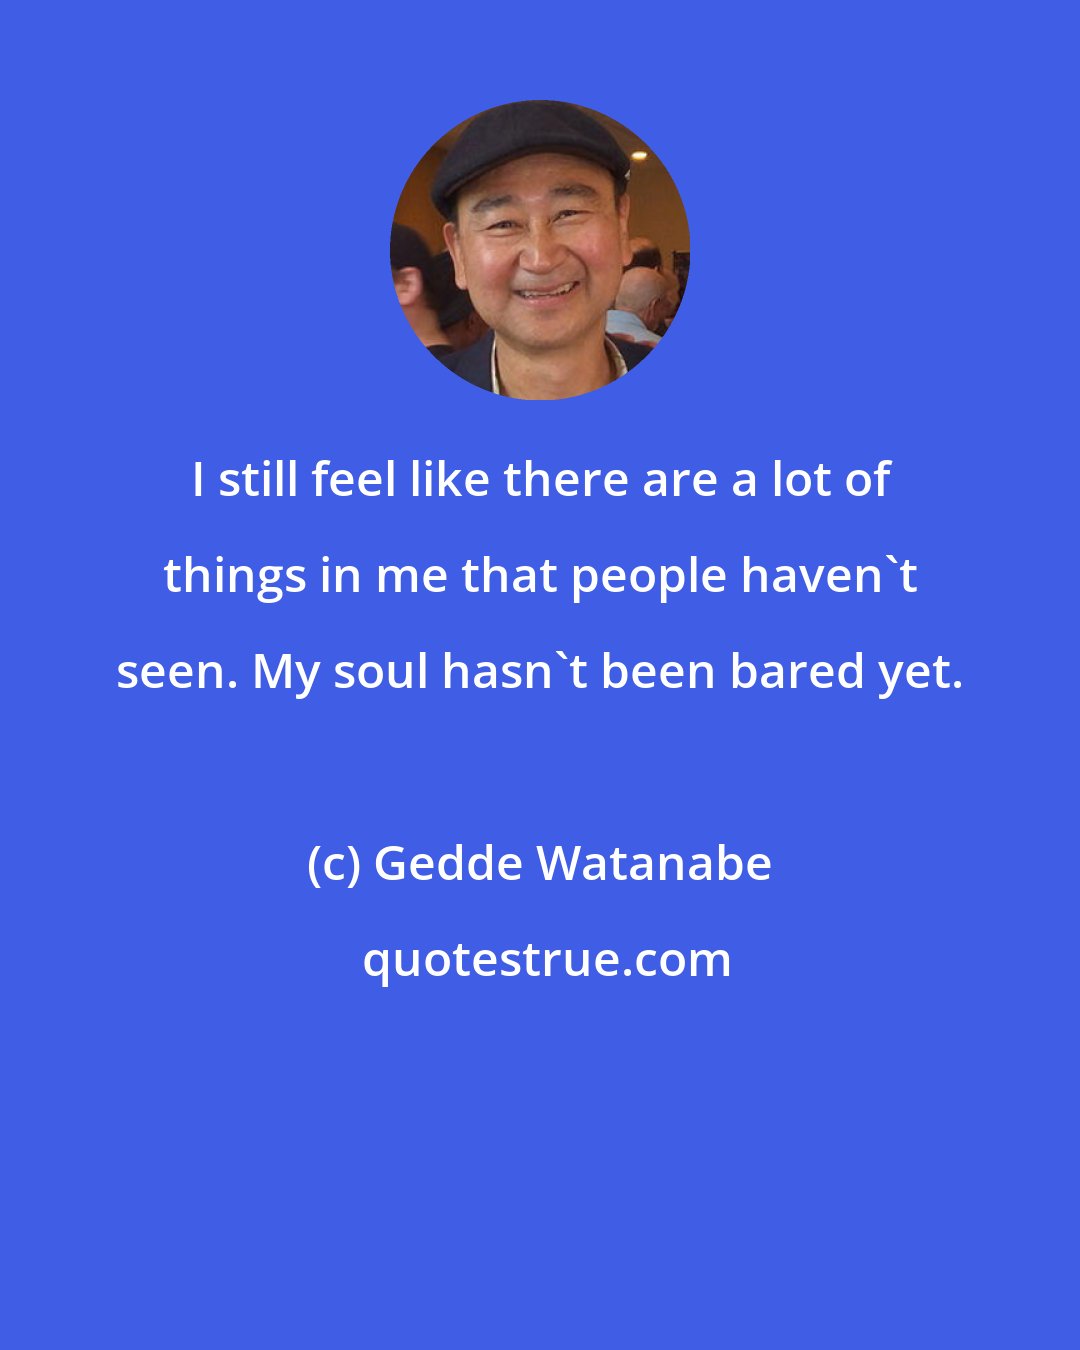 Gedde Watanabe: I still feel like there are a lot of things in me that people haven't seen. My soul hasn't been bared yet.